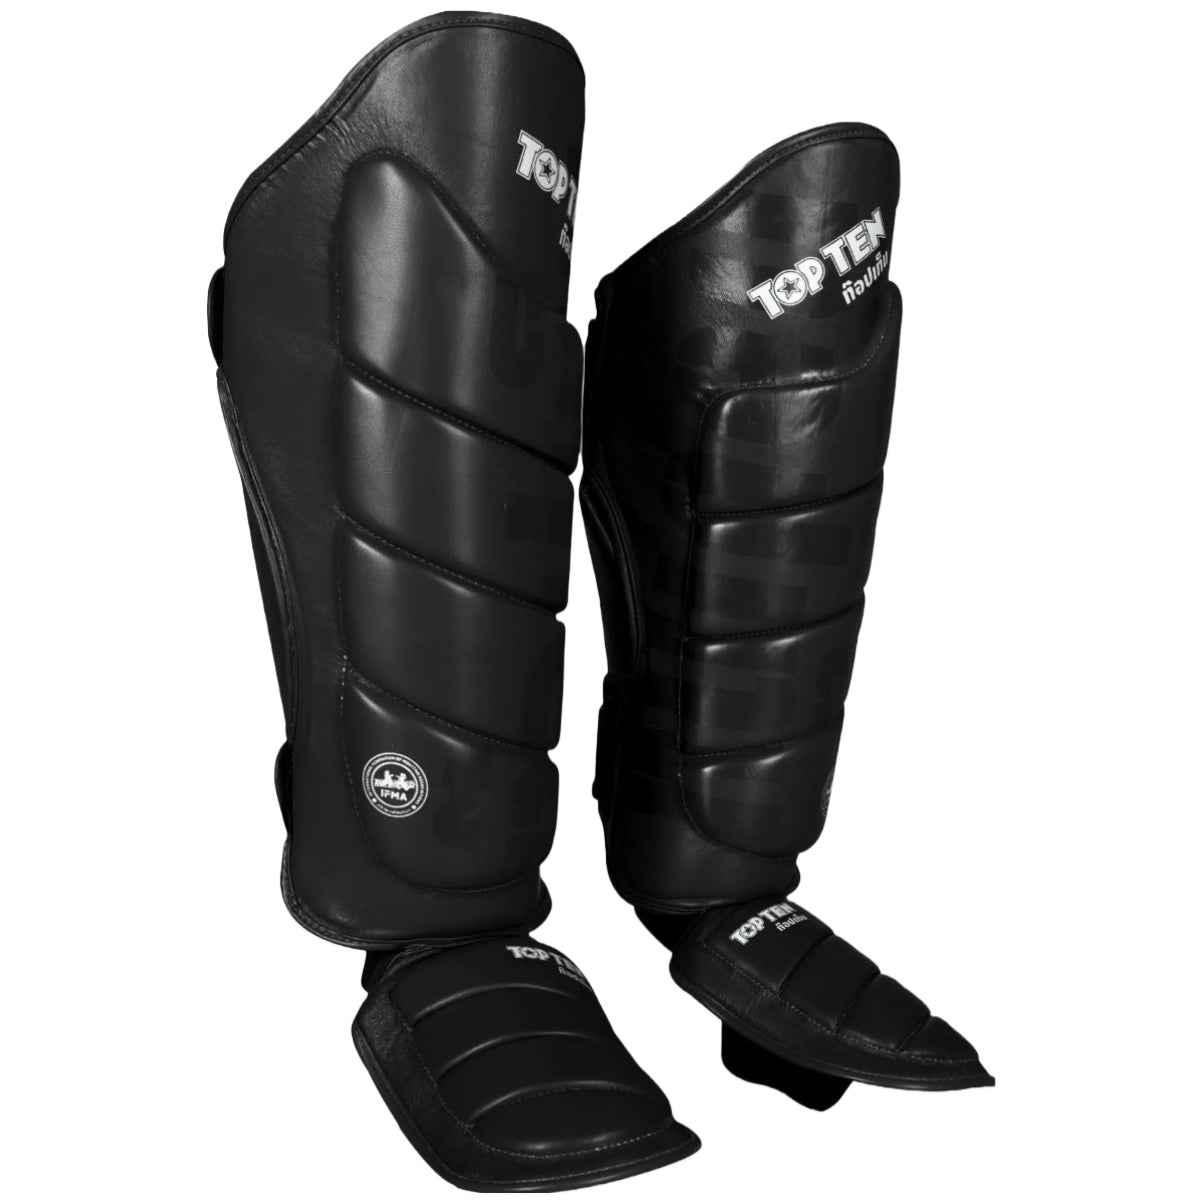 Black Top Ten Shin Guards from Made4Fighters